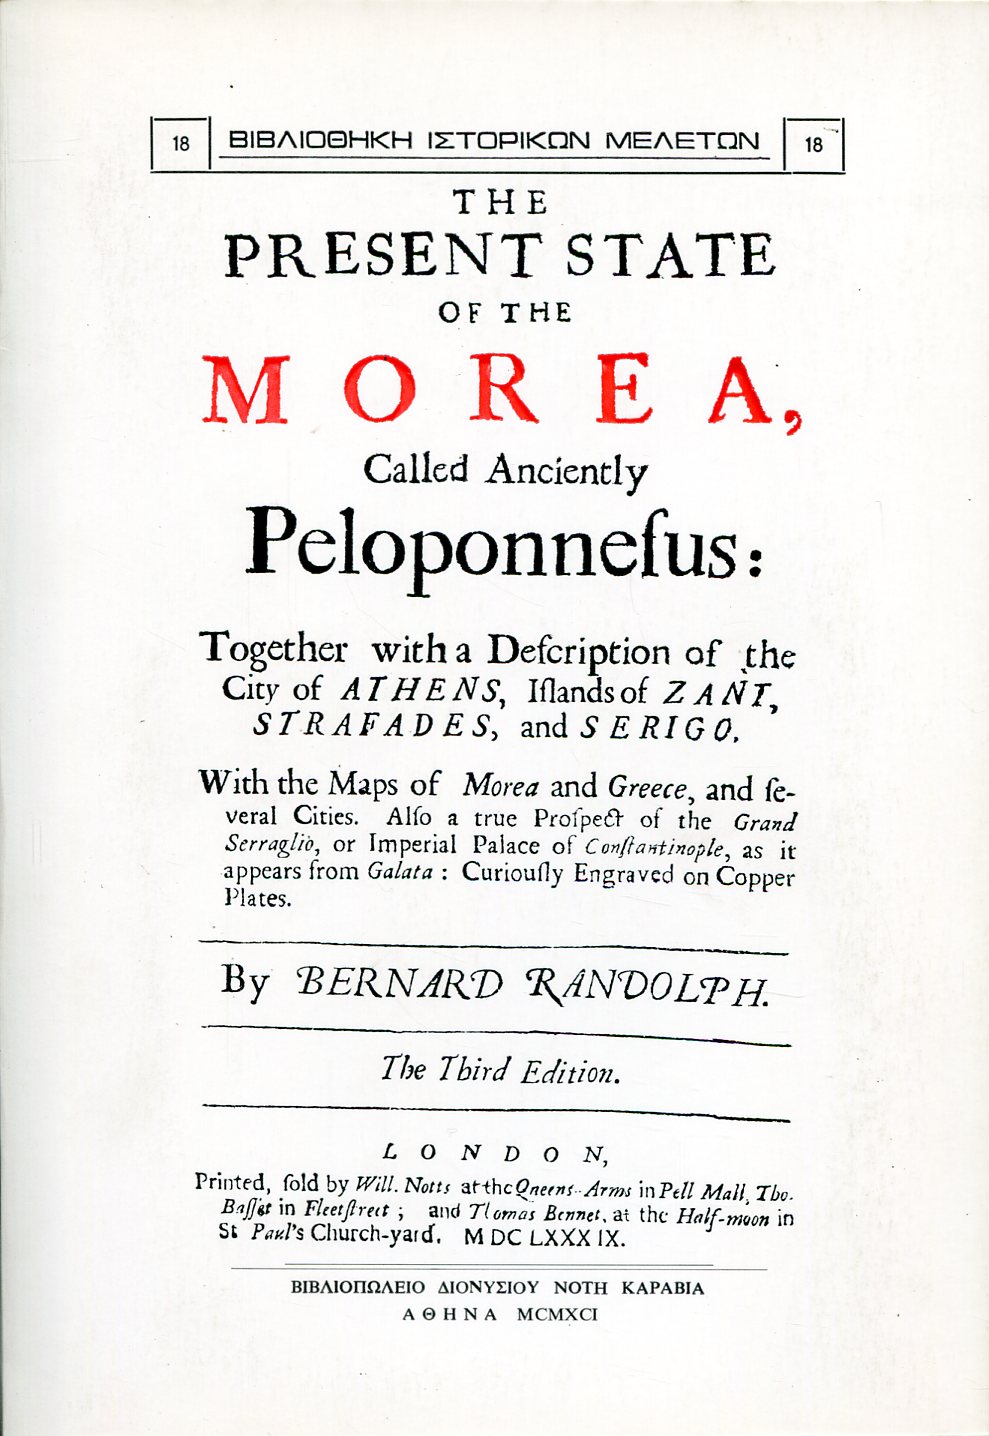 THE PRESENT STATE OF THE MOREA CALLED ANCIENTLY PELOPONNEFUS: TOGETHER WITH A DEFCRIPTION OF THE CITY OF ATHENS, IFLANDS OF ZANT, STRAFADES, AND SERIGO. WITH THE MAPS OF MOREA AND GREECE, AND FEVERAL CITIES. ALSO A TRUE PROFPECT OF THE GRAND SERRAGLIO, OR IMPERIAL PALACE OF CONFTANTINOPLE, AS IT APPEARS FROM GALATA: CURIOUFLY ENGRAVED ON COPPER PLATES